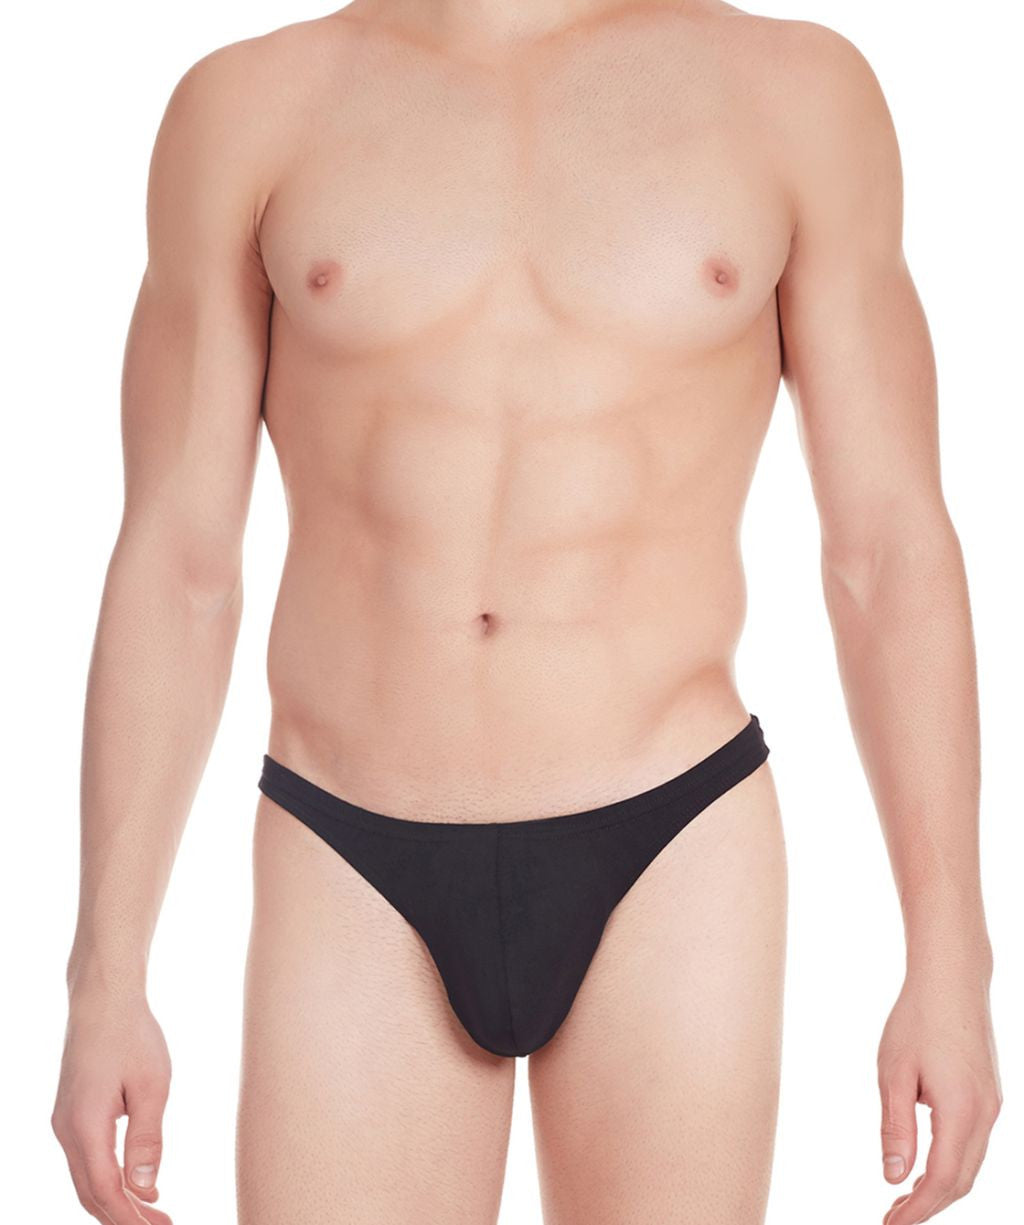 Buy LEADWORT Navy Blue Polyester and Spandex G-String Thong